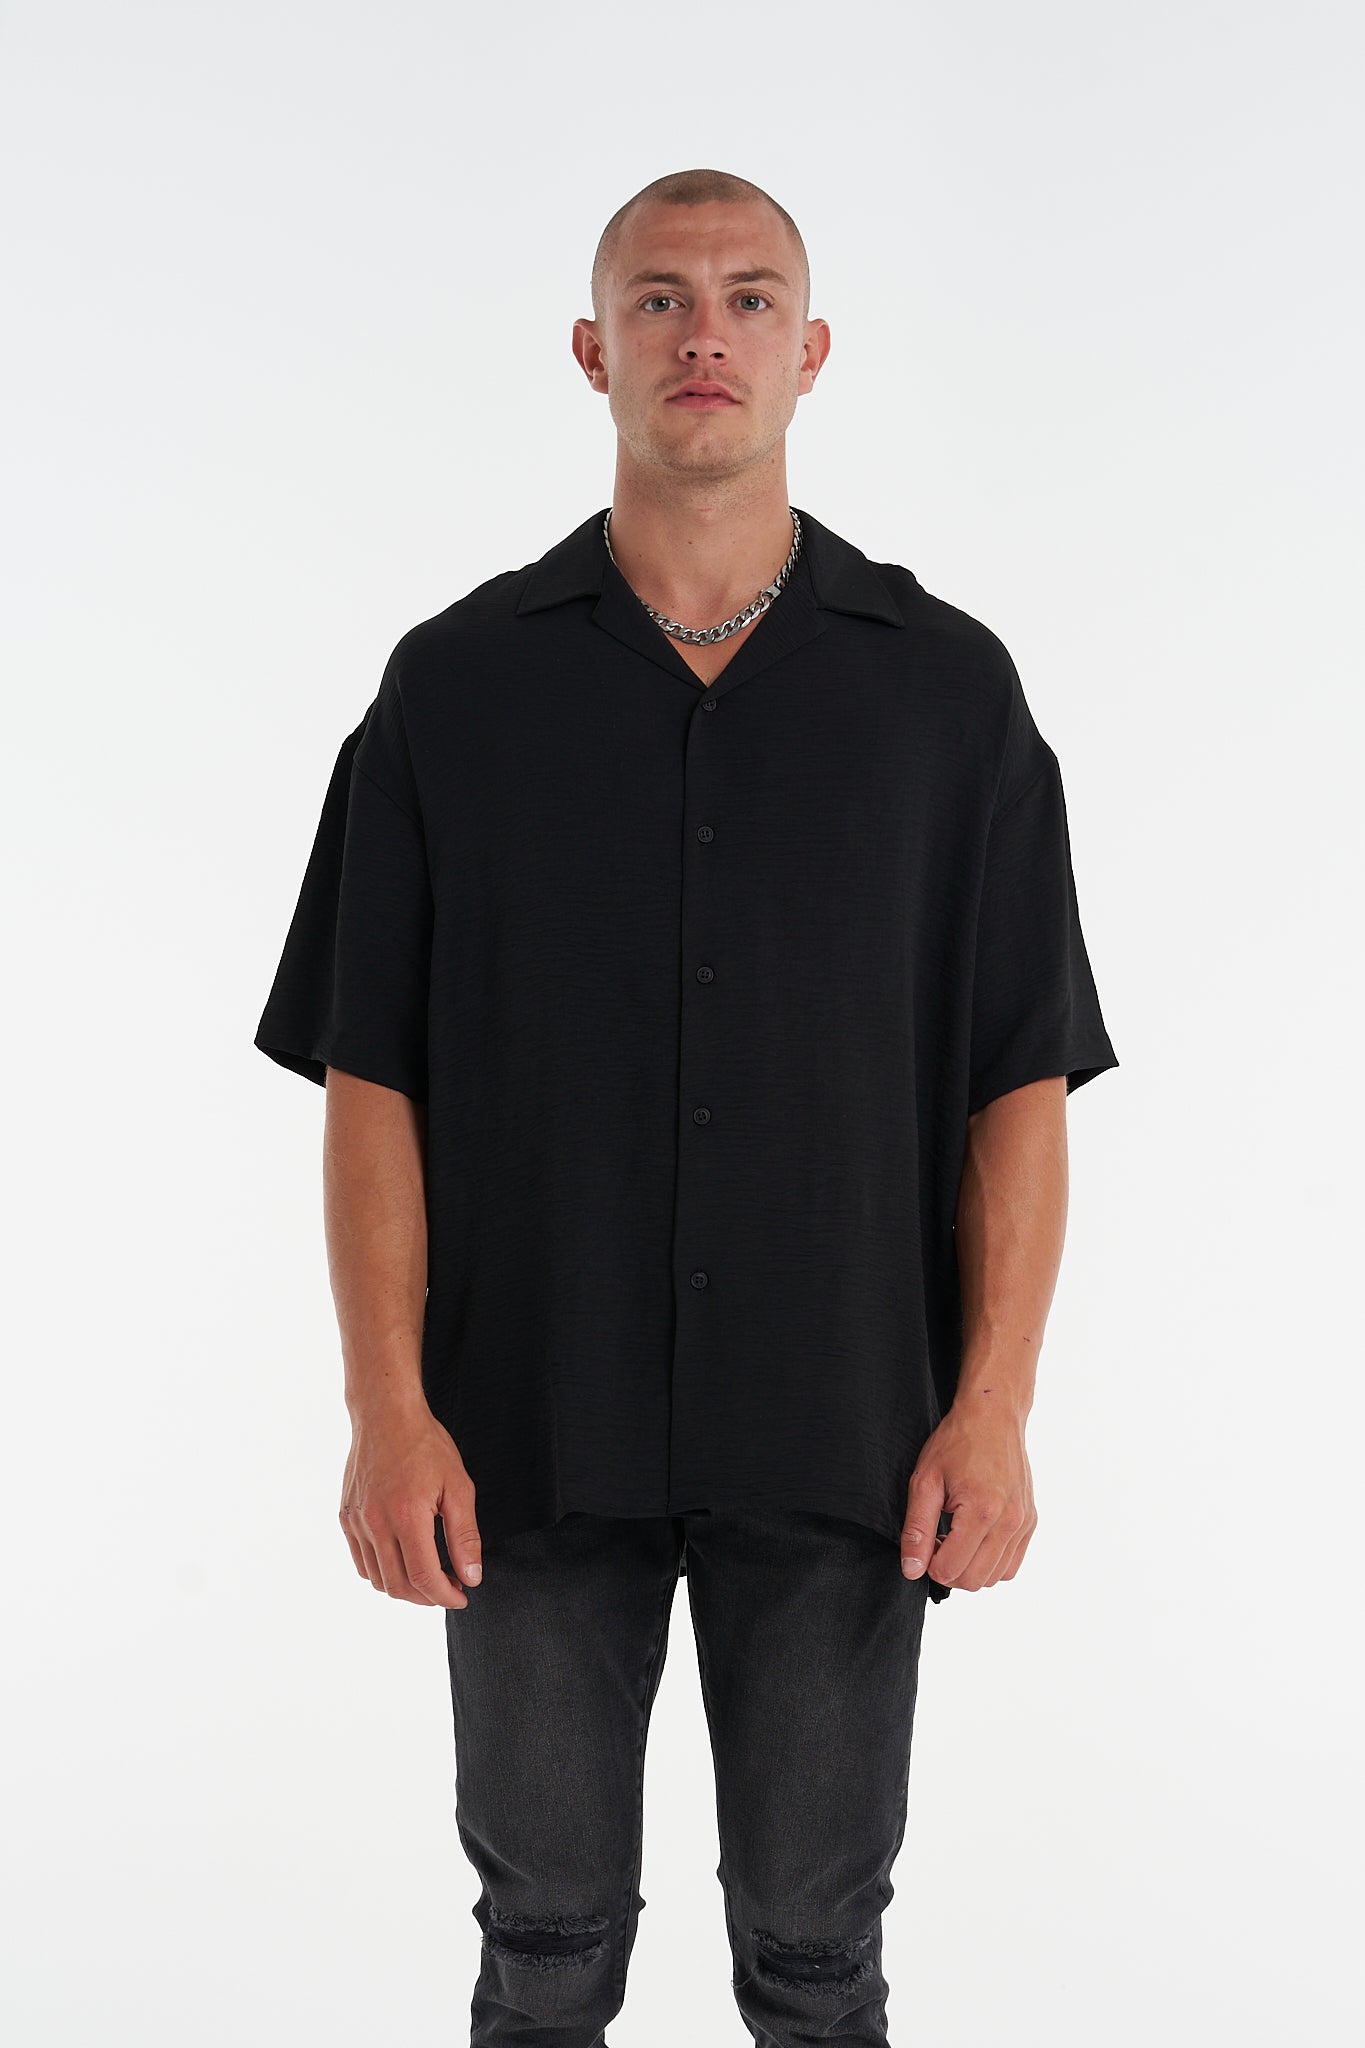 Wrinkled Textured Look Shirt - UNEFFECTED STUDIOS® - Shirts & Tops - UNEFFECTED STUDIOS®